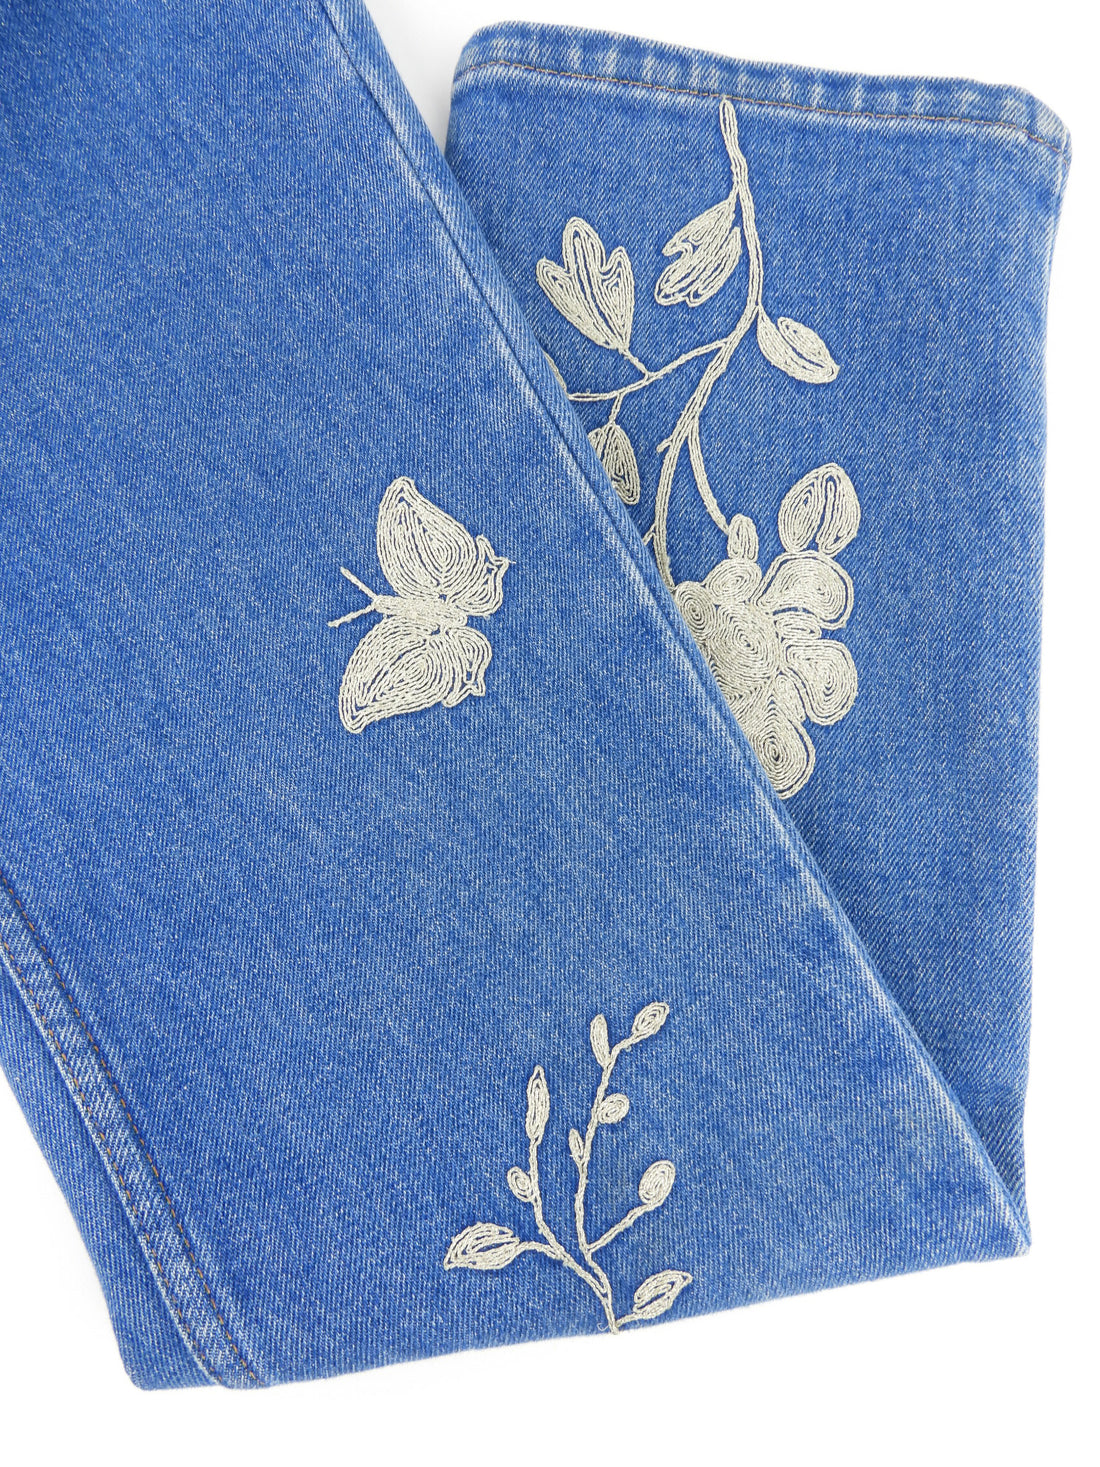 Gucci Blue Denim Silver Floral Embroidered Jeans - 25 – I MISS YOU